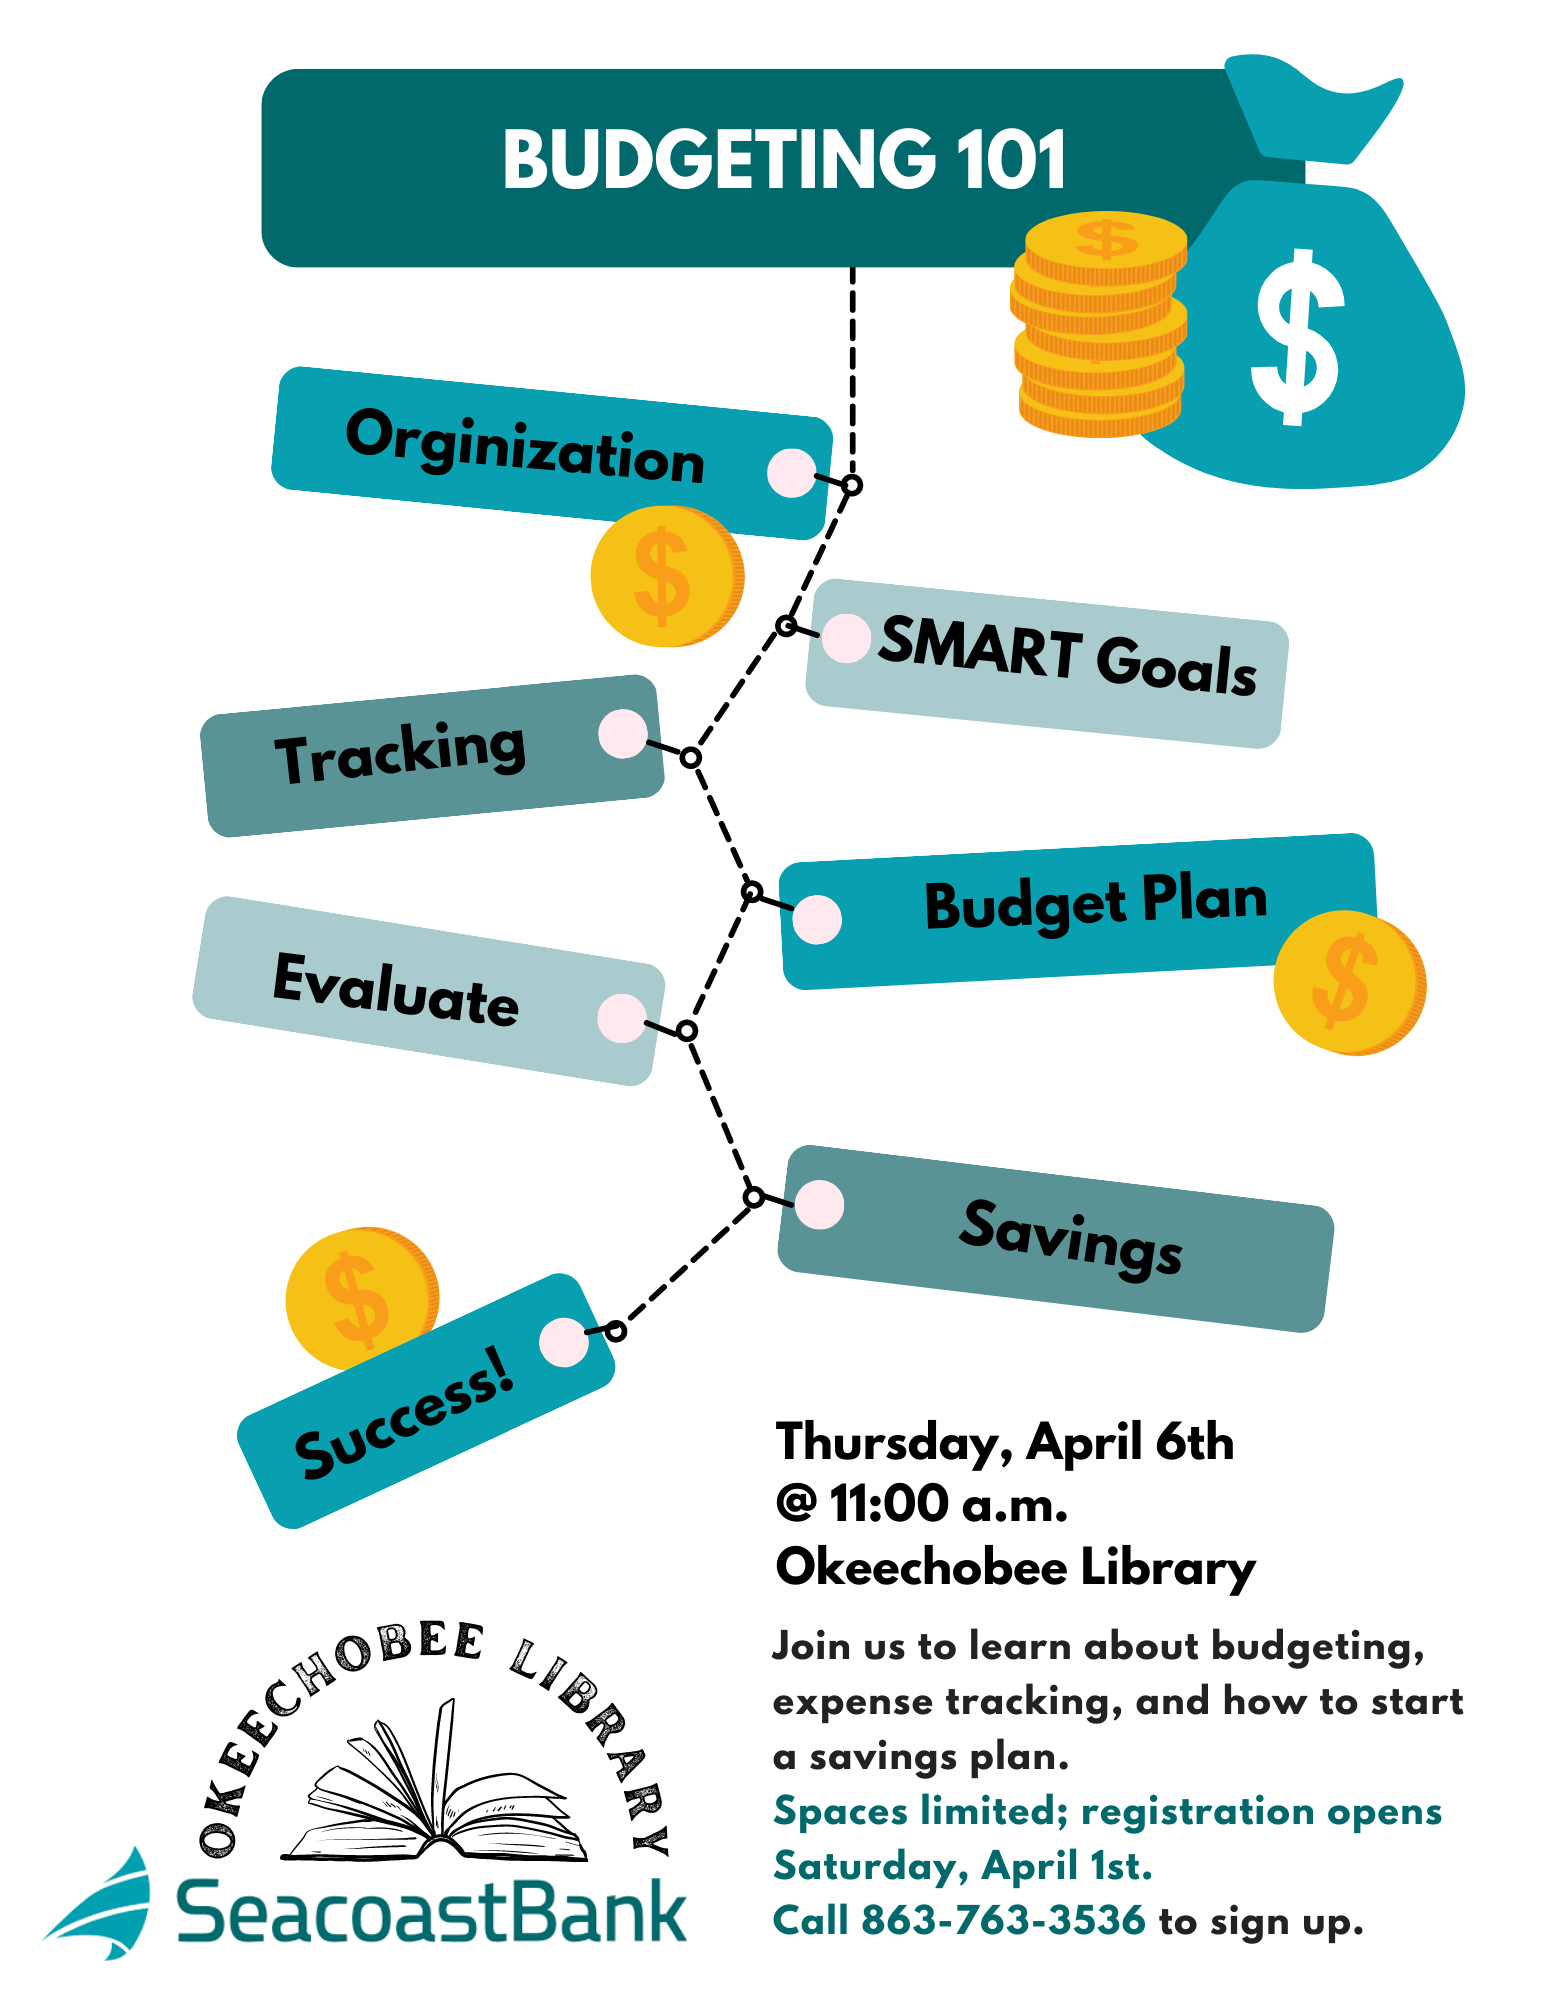 Join us at the Okeechobee Library for a Budgeting 101 class on Thursday, April 6th @ 11:00 a.m., led by experts from Seacoast Bank!